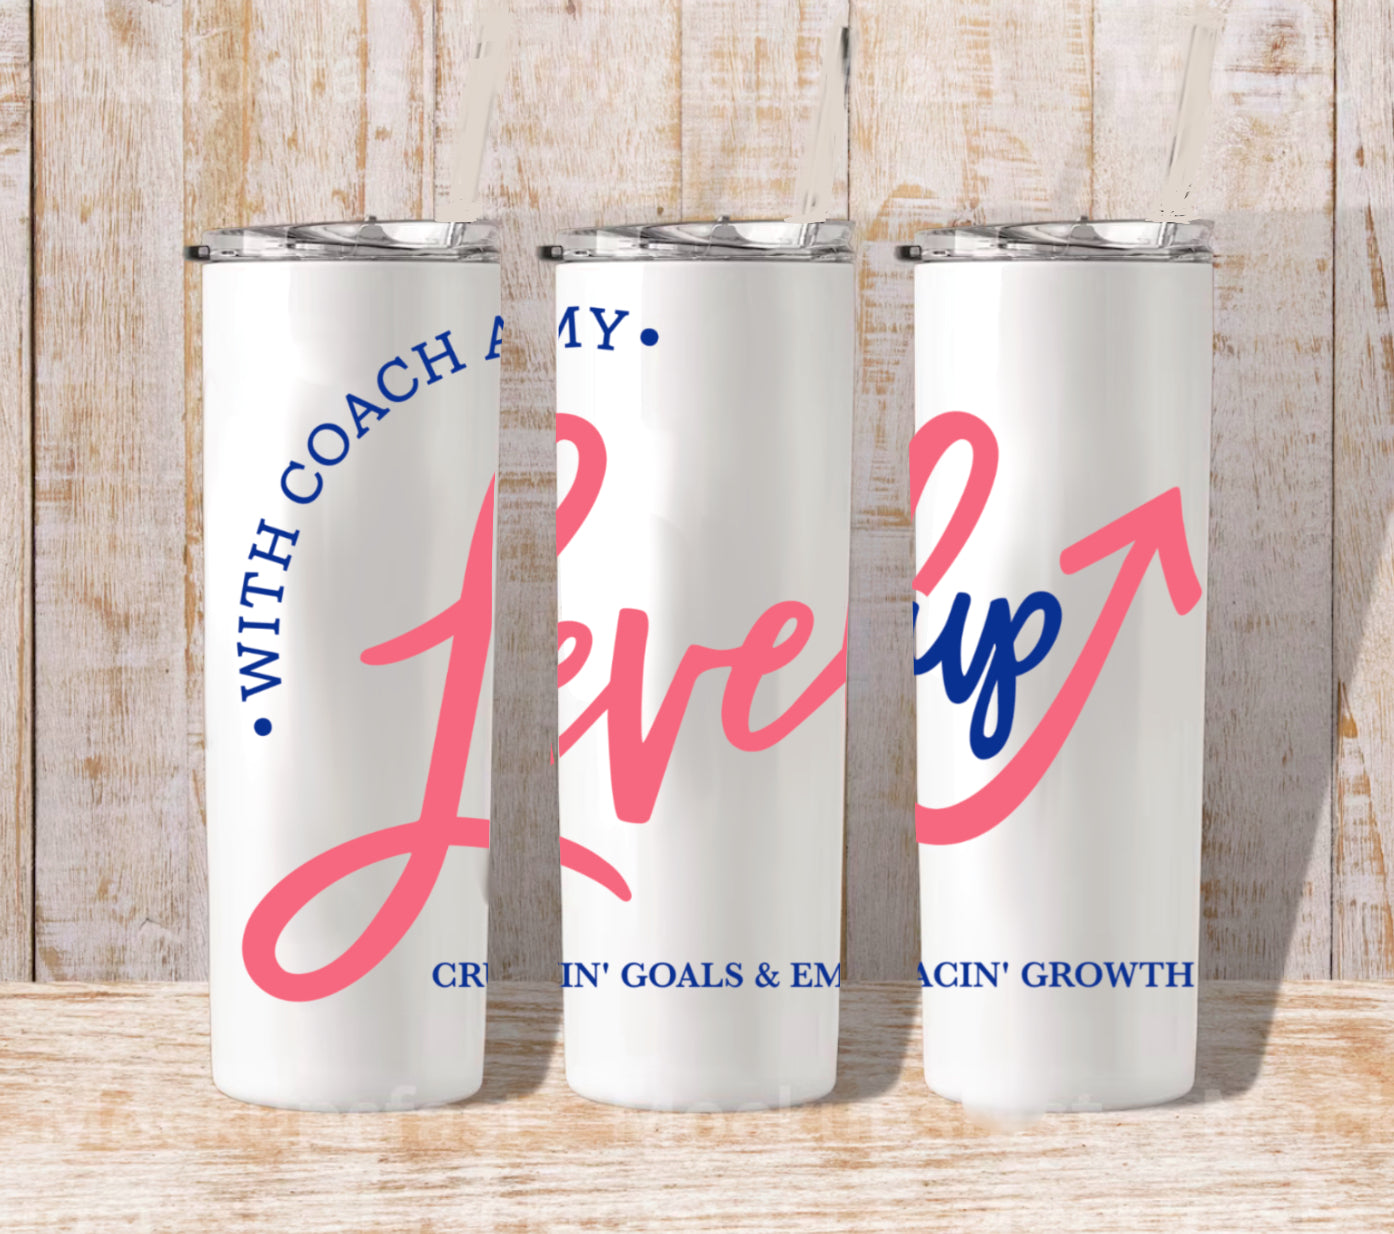 Southern & Healthy - Level Up - PREORDER